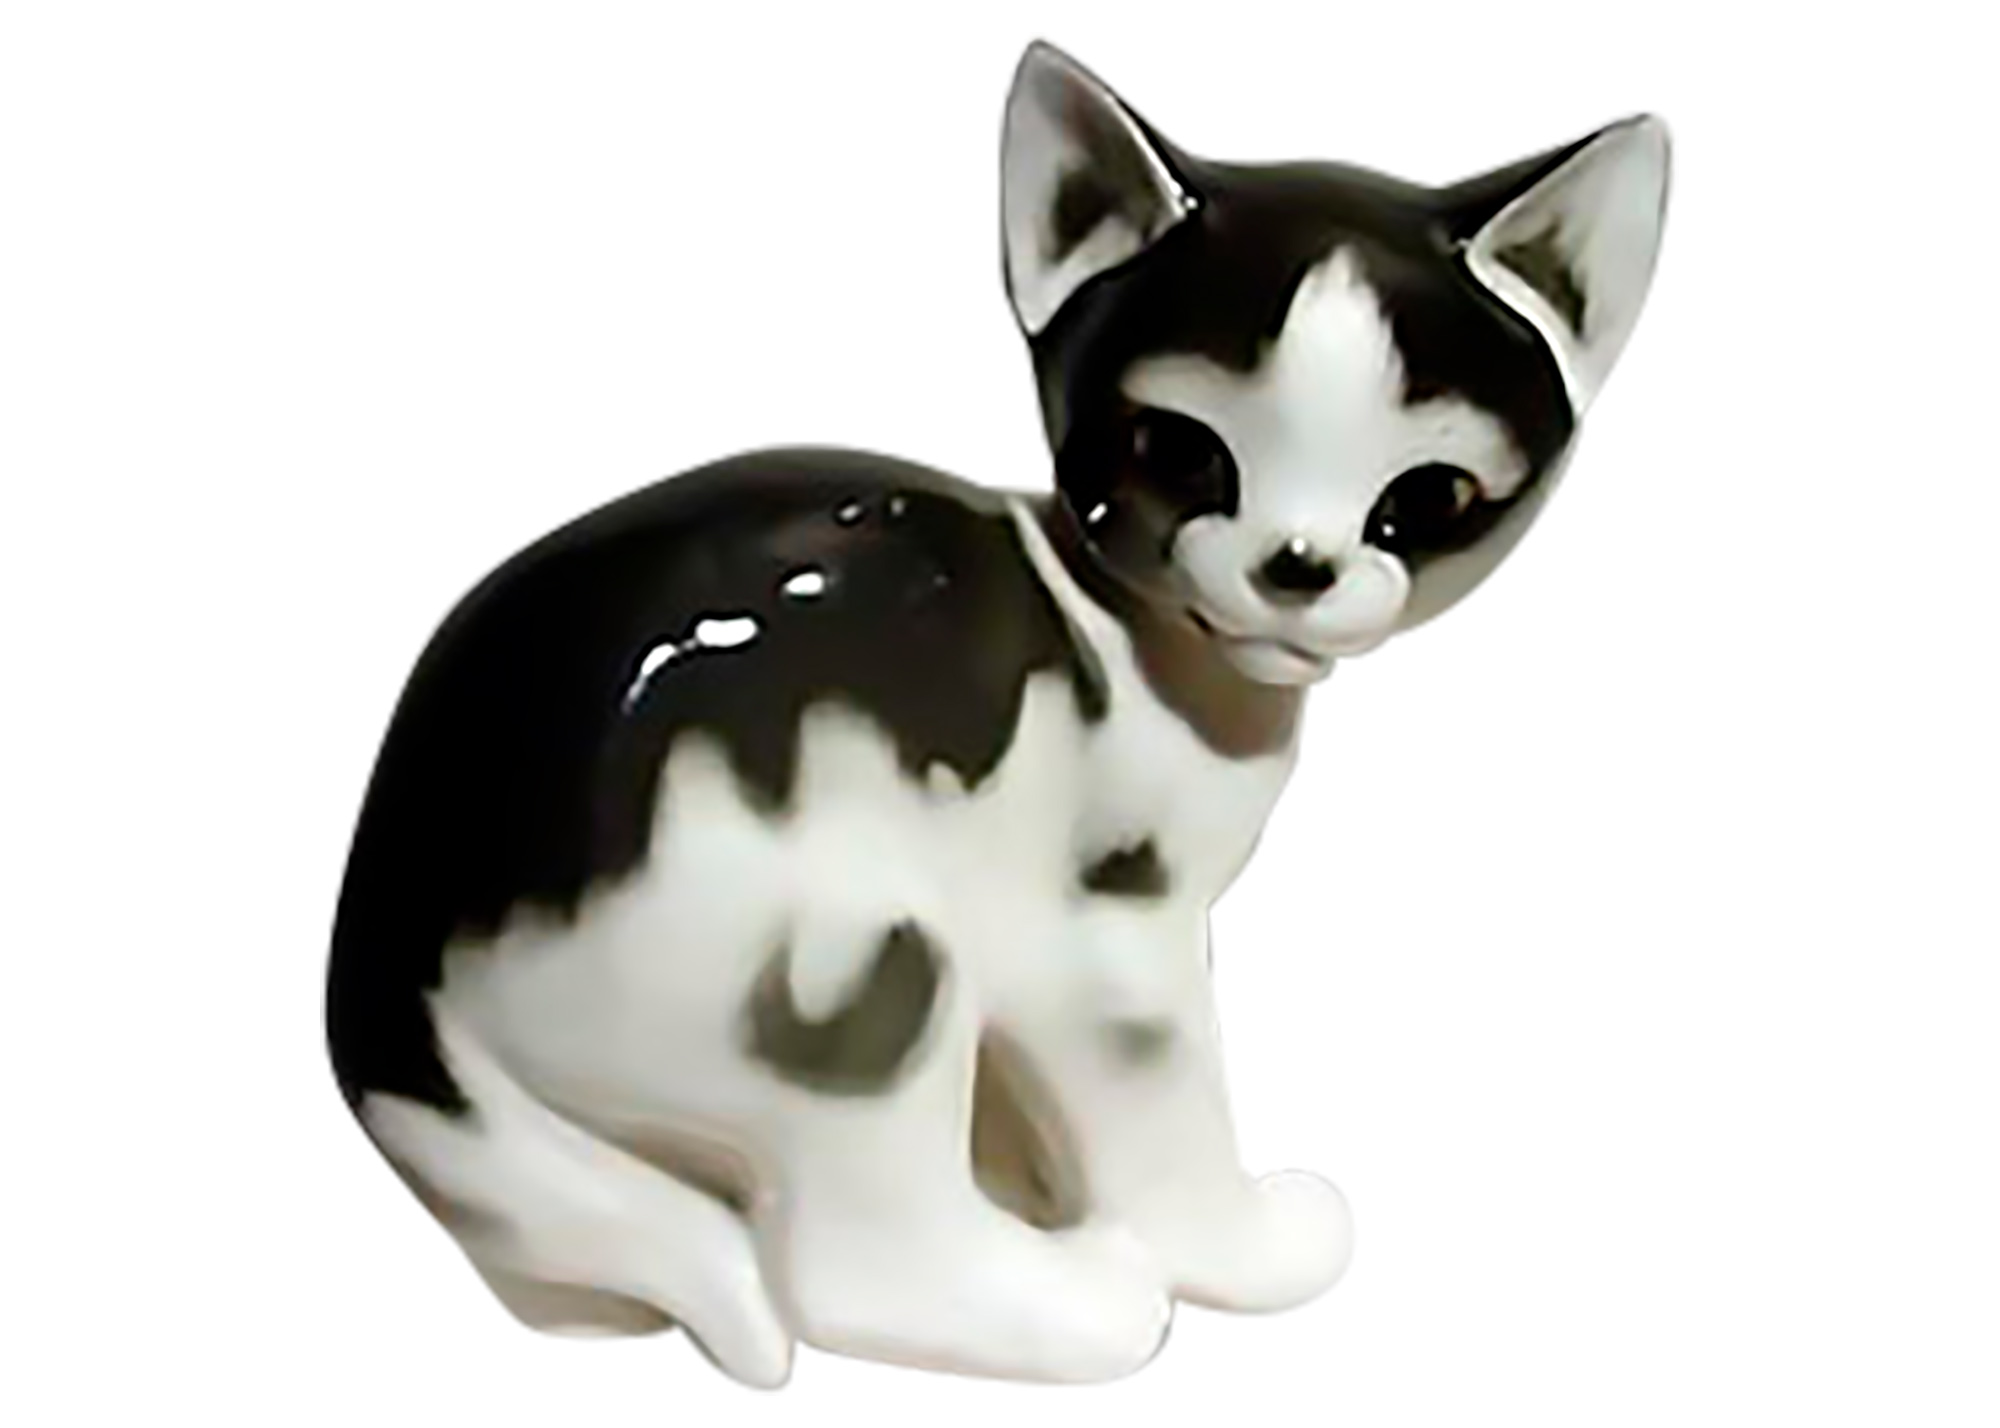 Cute black and white porcelain kitten is ready to pounce!